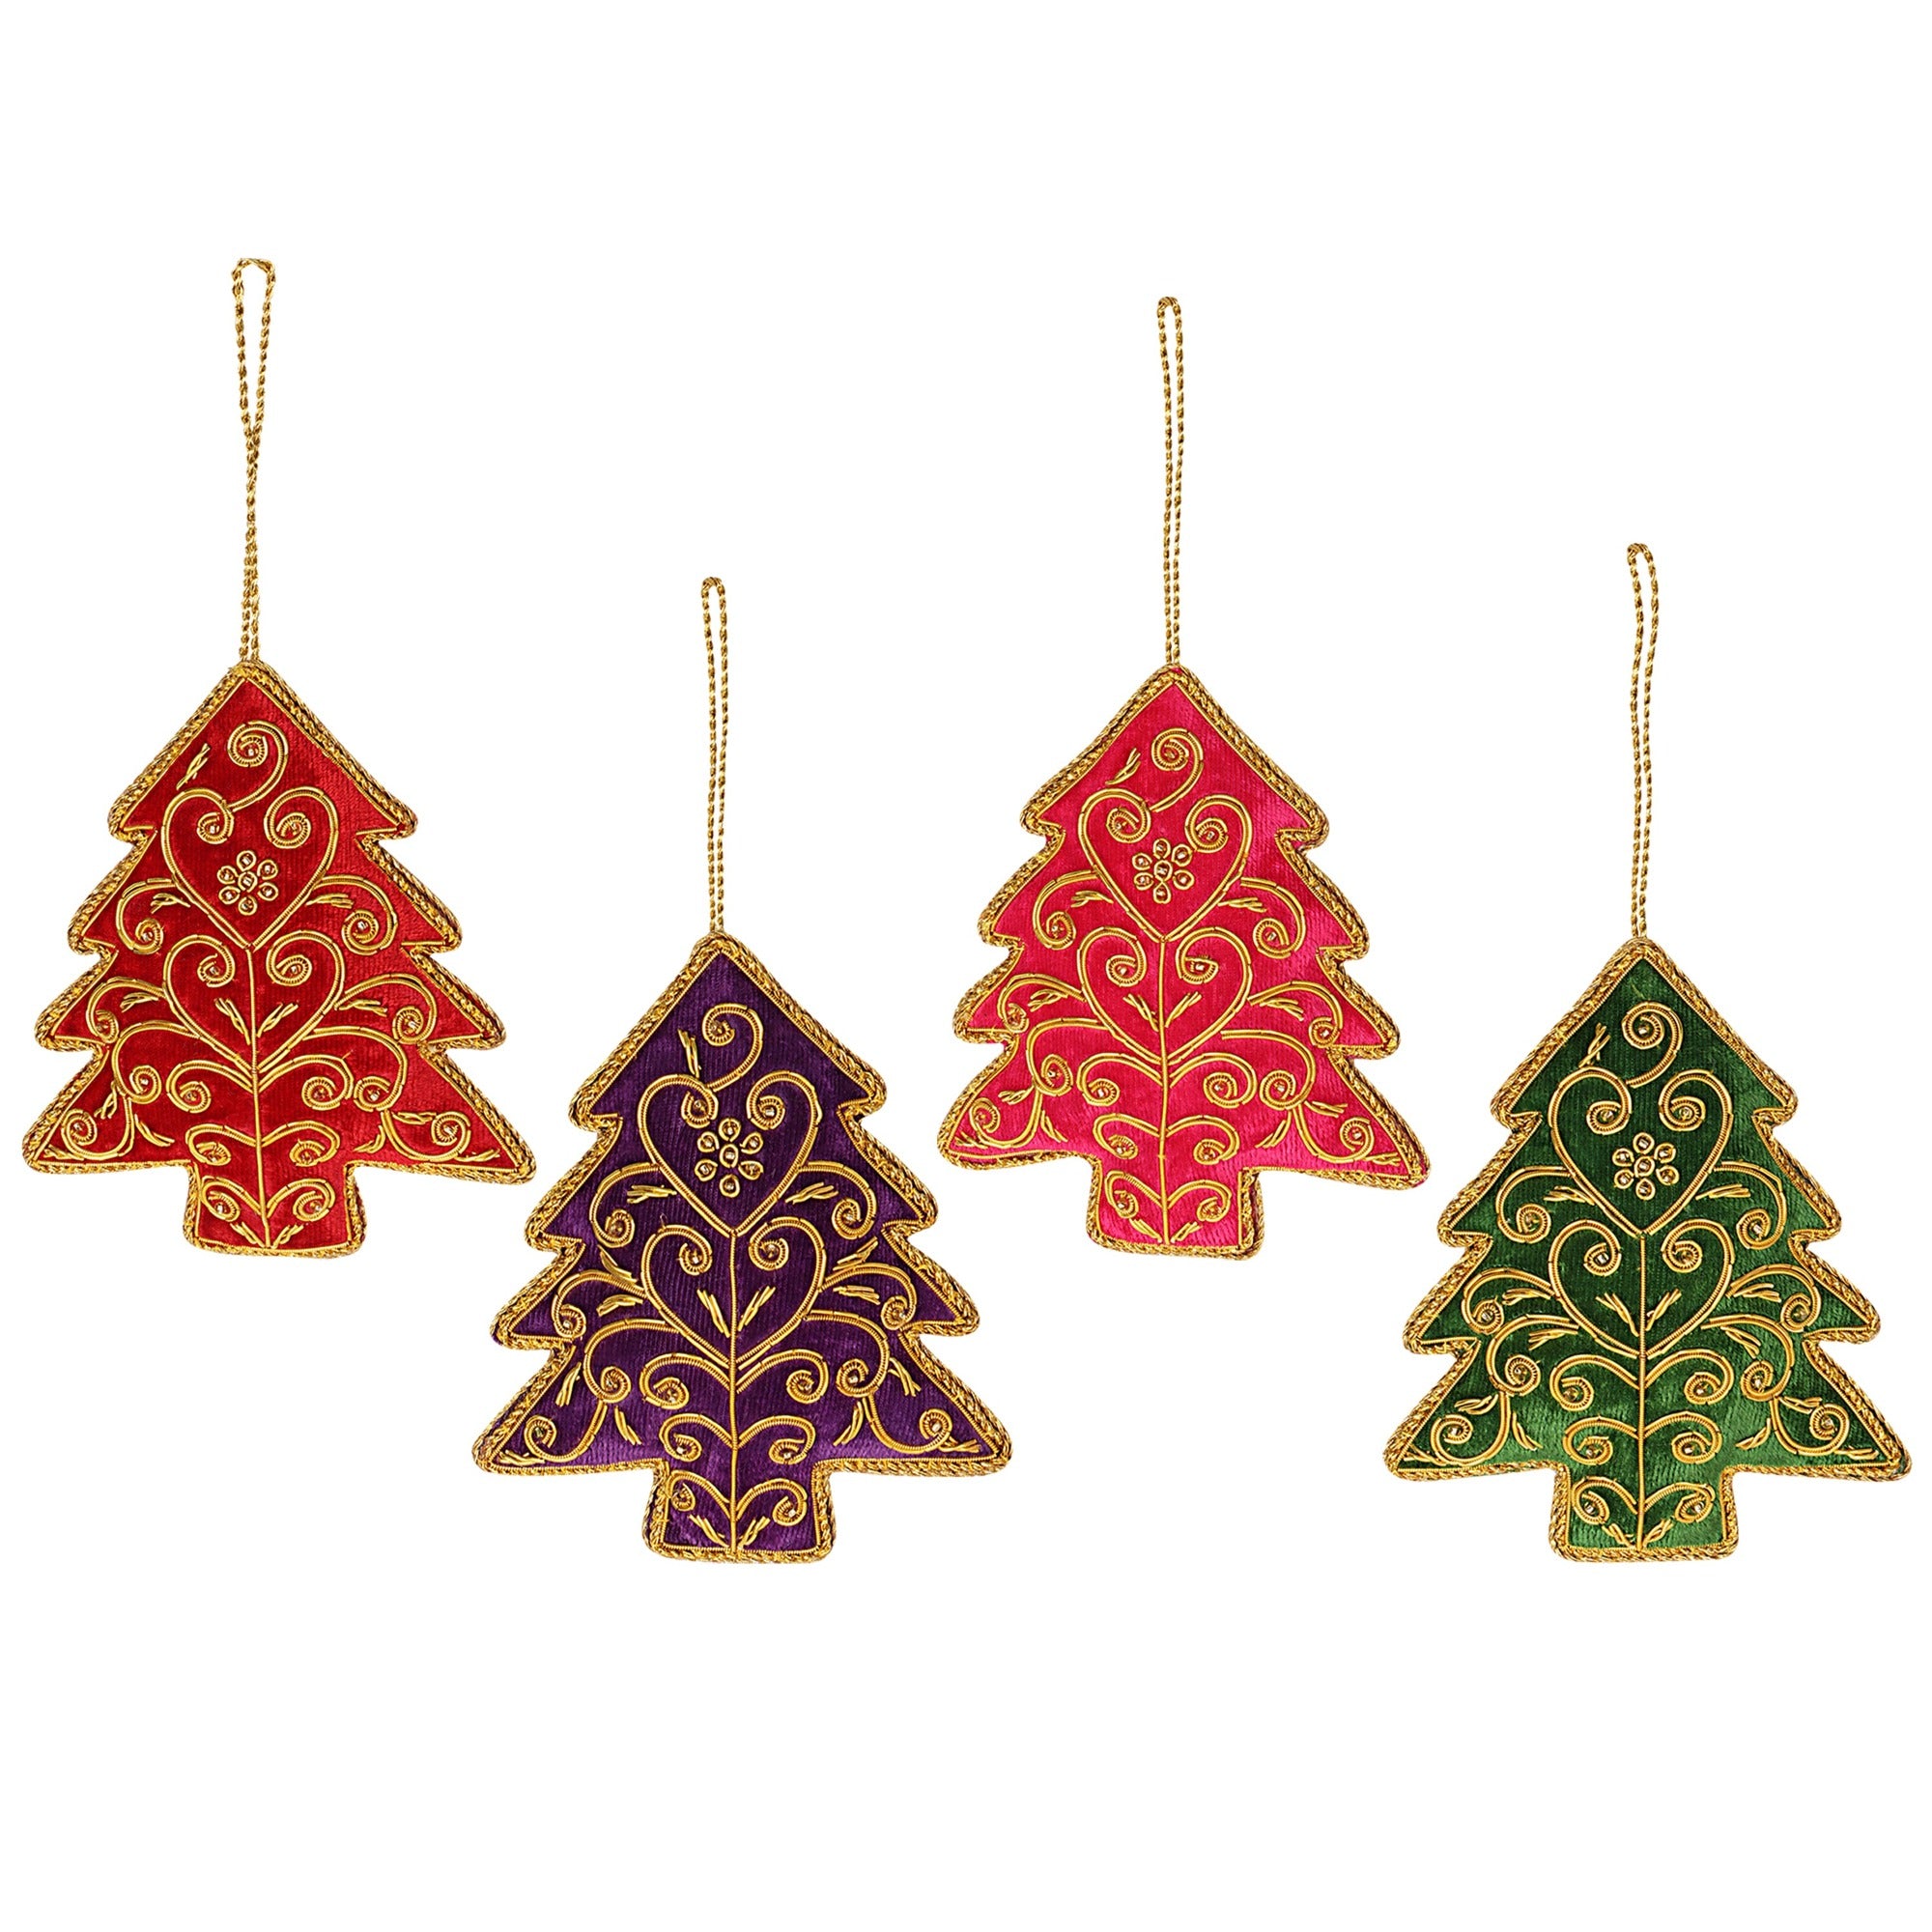 Decorative Tree Christmas ornaments set of 4 pieces for holiday decor (1SET=4PC)